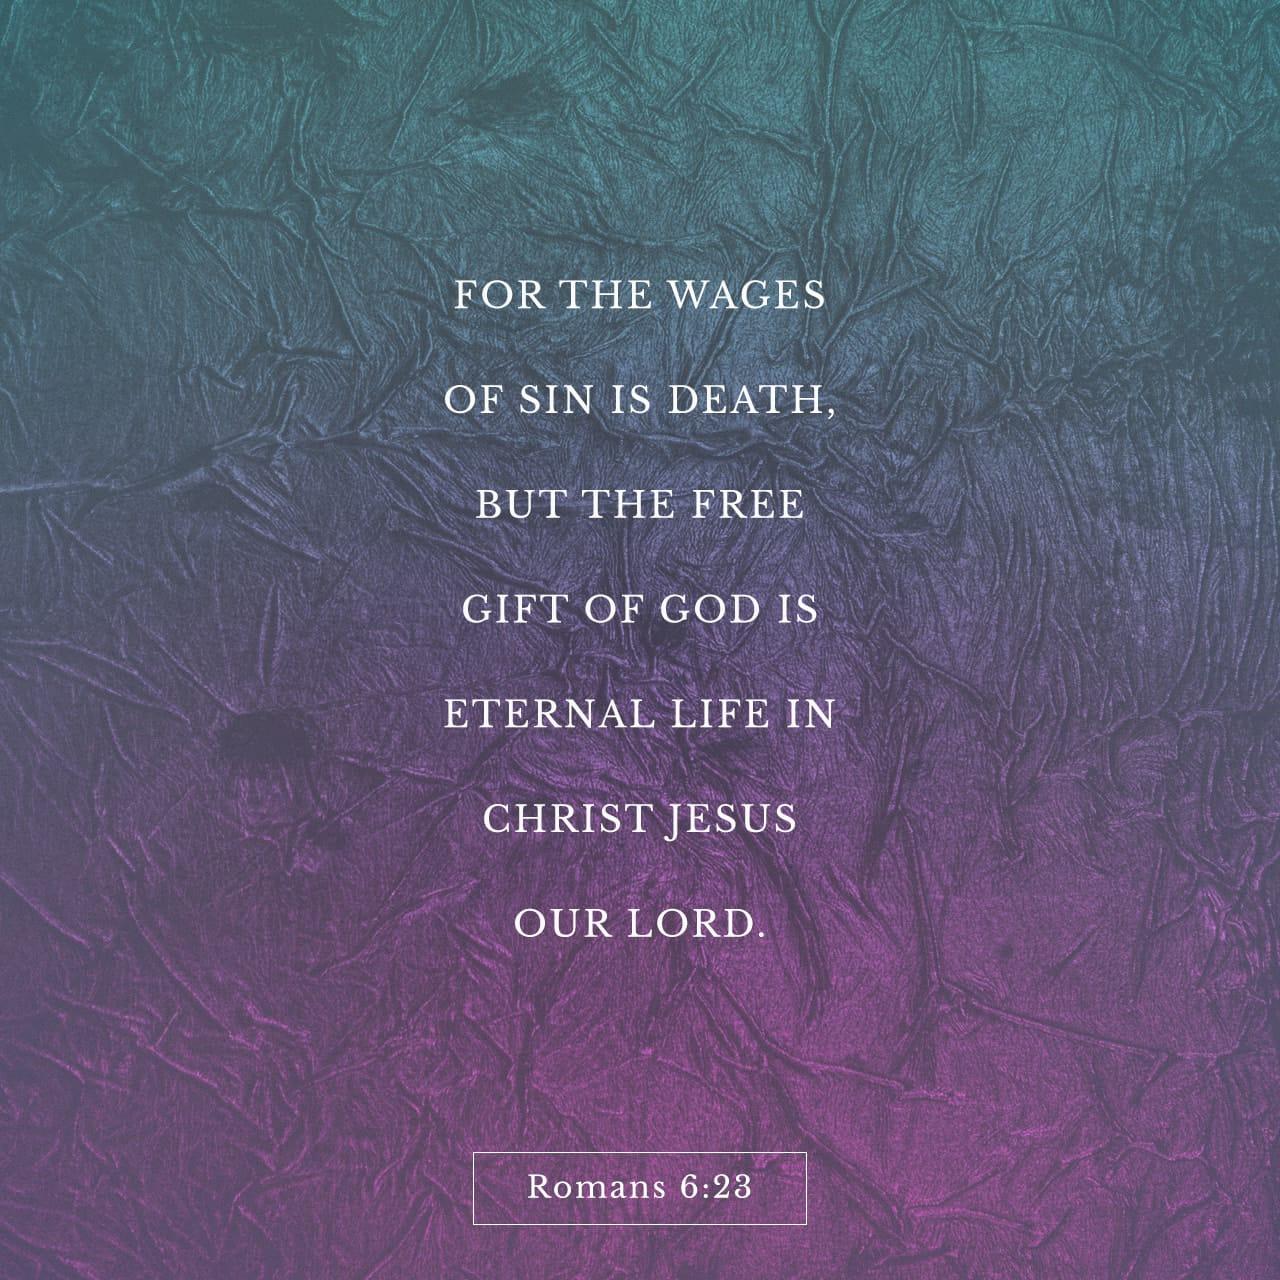 Bible Verse of the Day - day 90 - image 1891 (Romans 6:23)